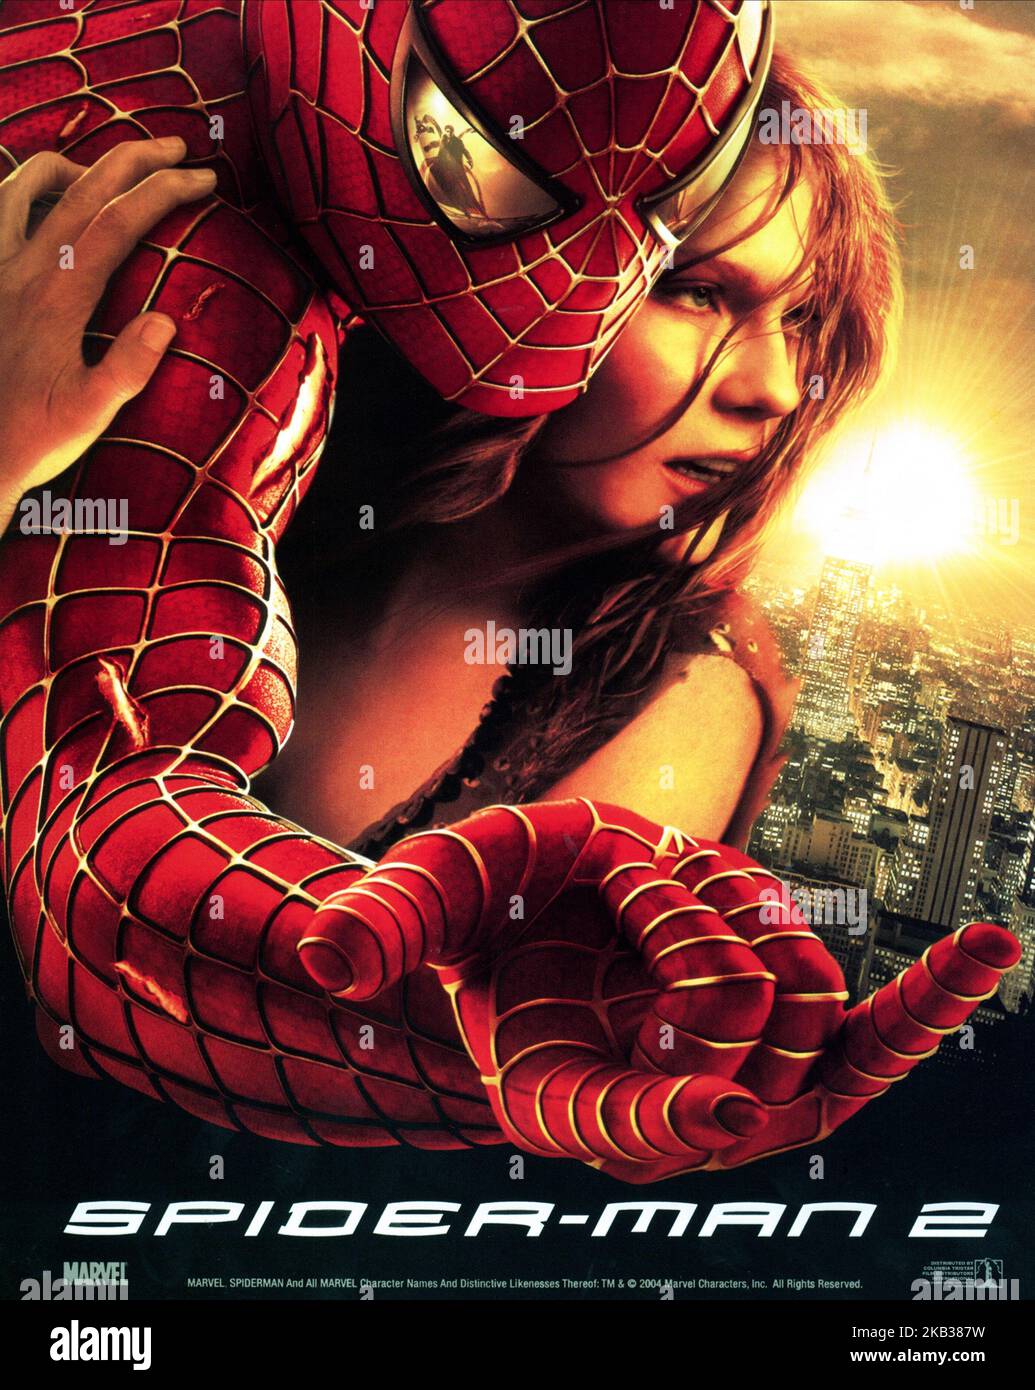 MAGUIRE,POSTER, SPIDER-MAN 2, 2004 Stock Photo